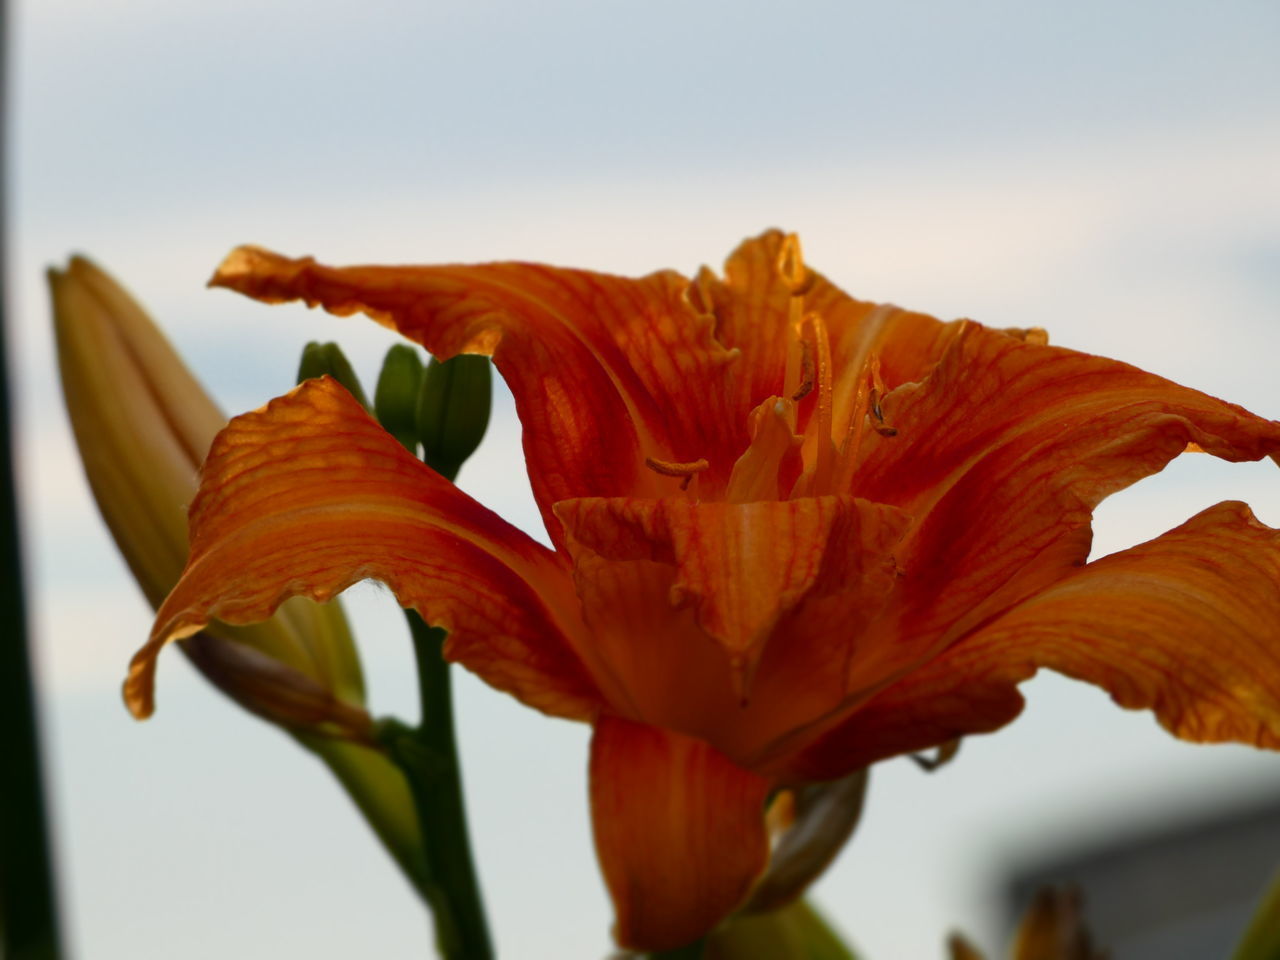 CLOSE-UP OF ORANGE LILY AGAINST SKY